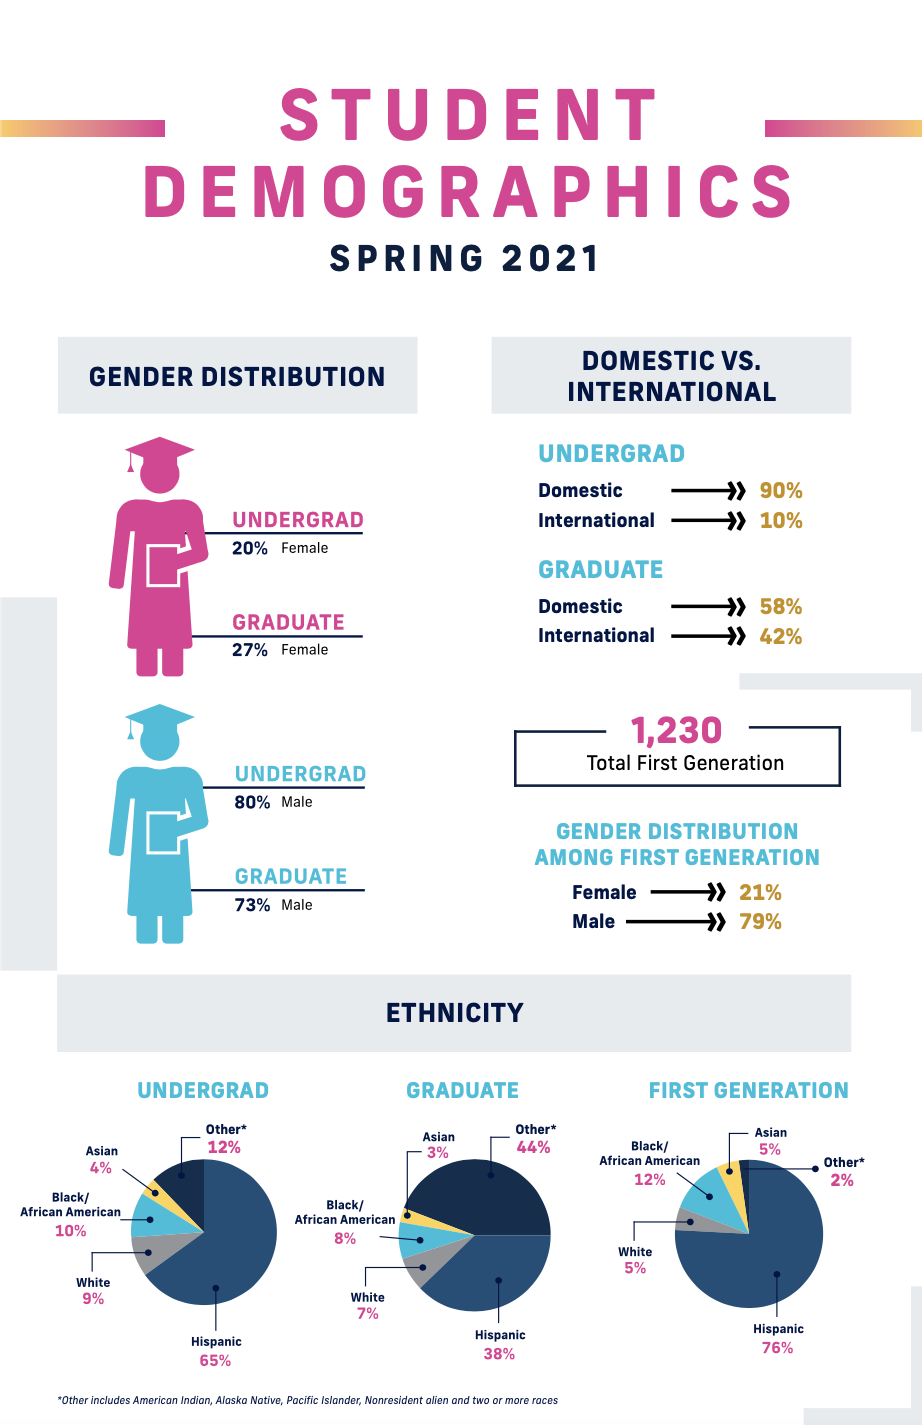 degrees-fiu-college-engineering-computing-infographic